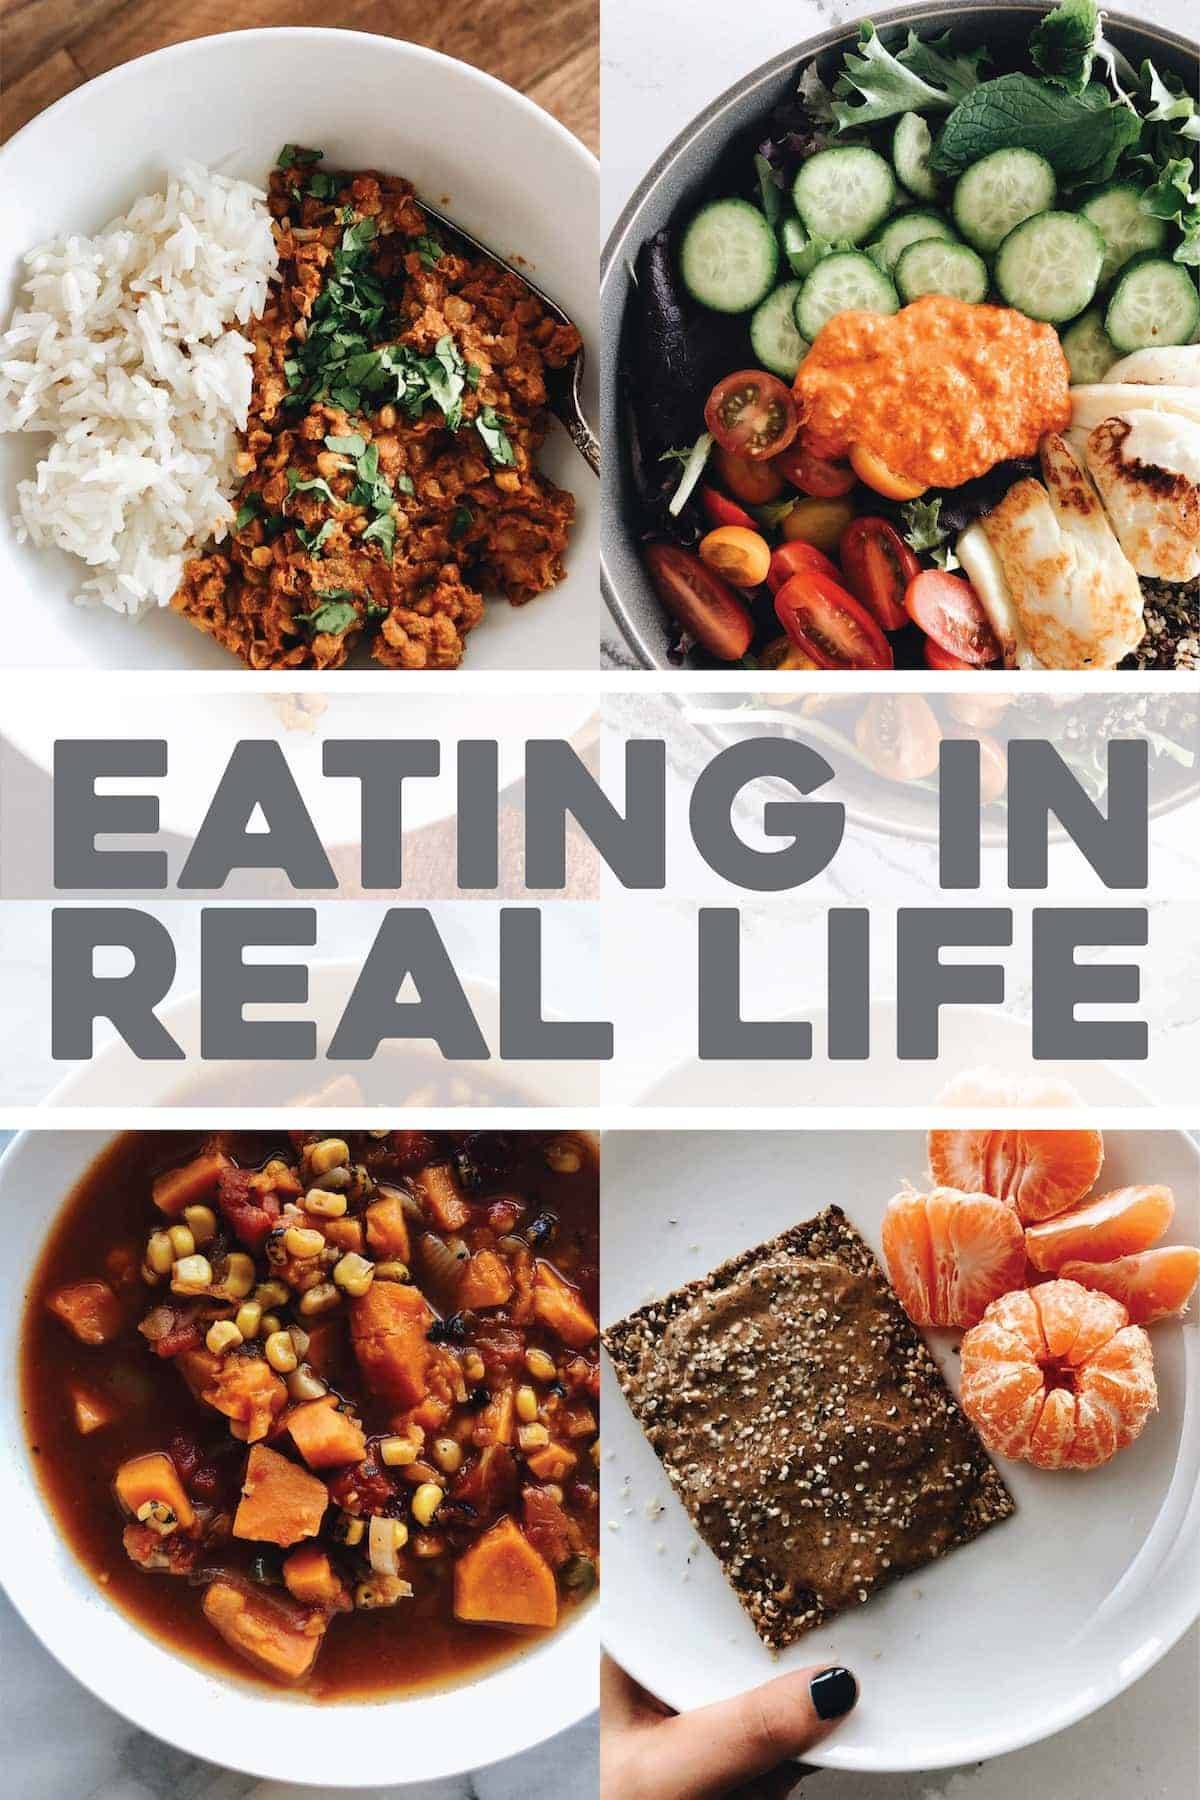 Four meals in dishes for Eating in Real Life.